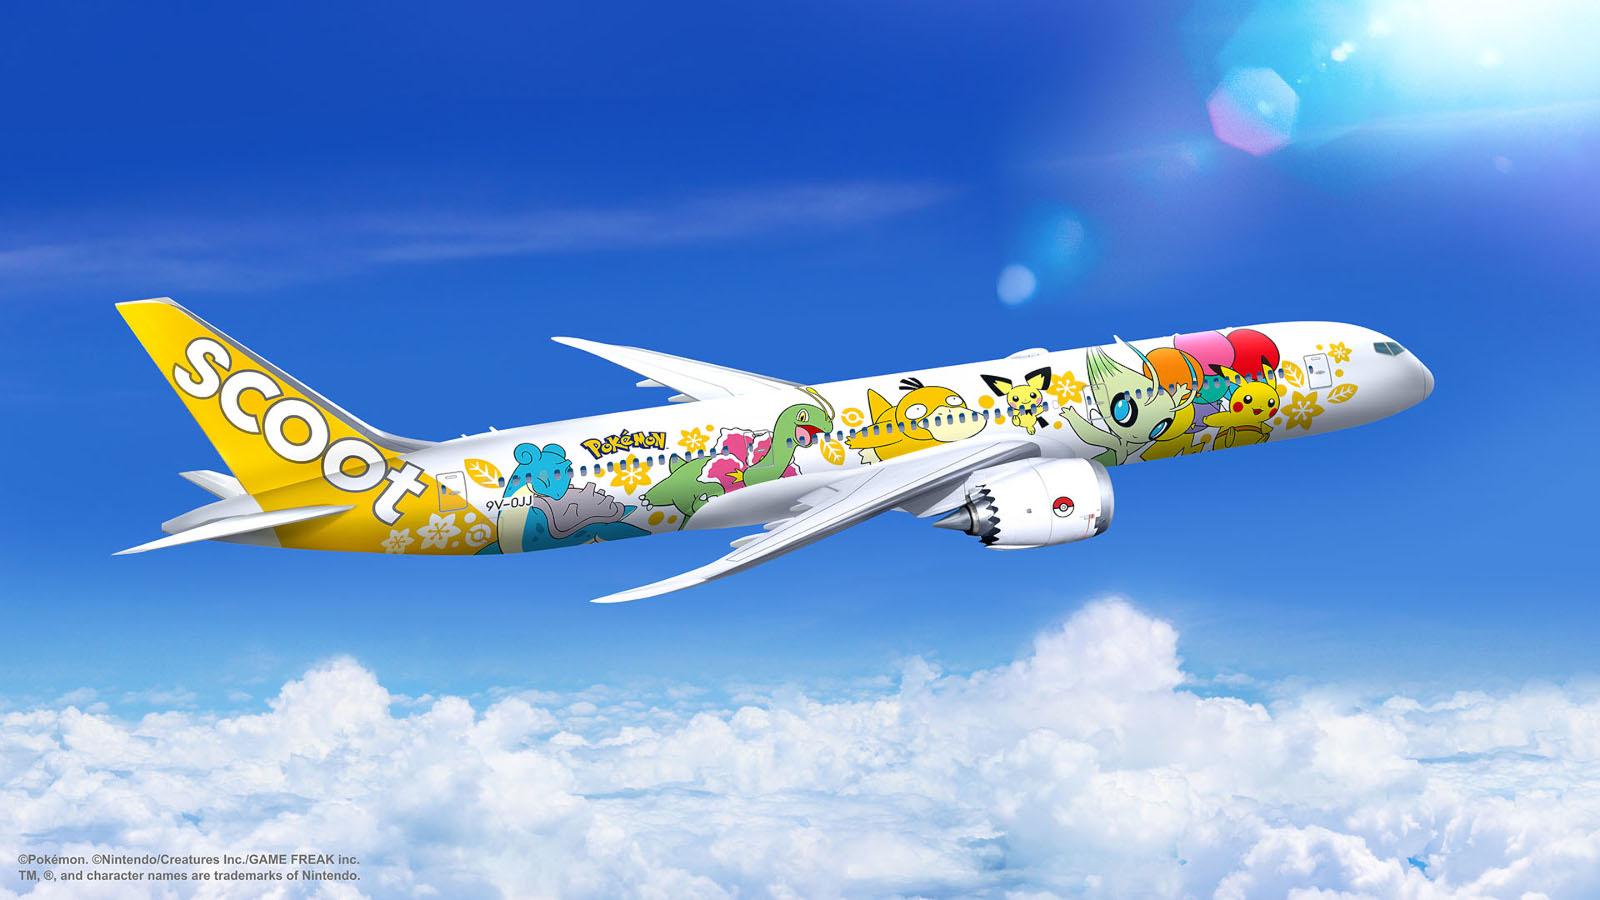 Pokemon, Scoot To Launch A Special-Themed Dreamliner